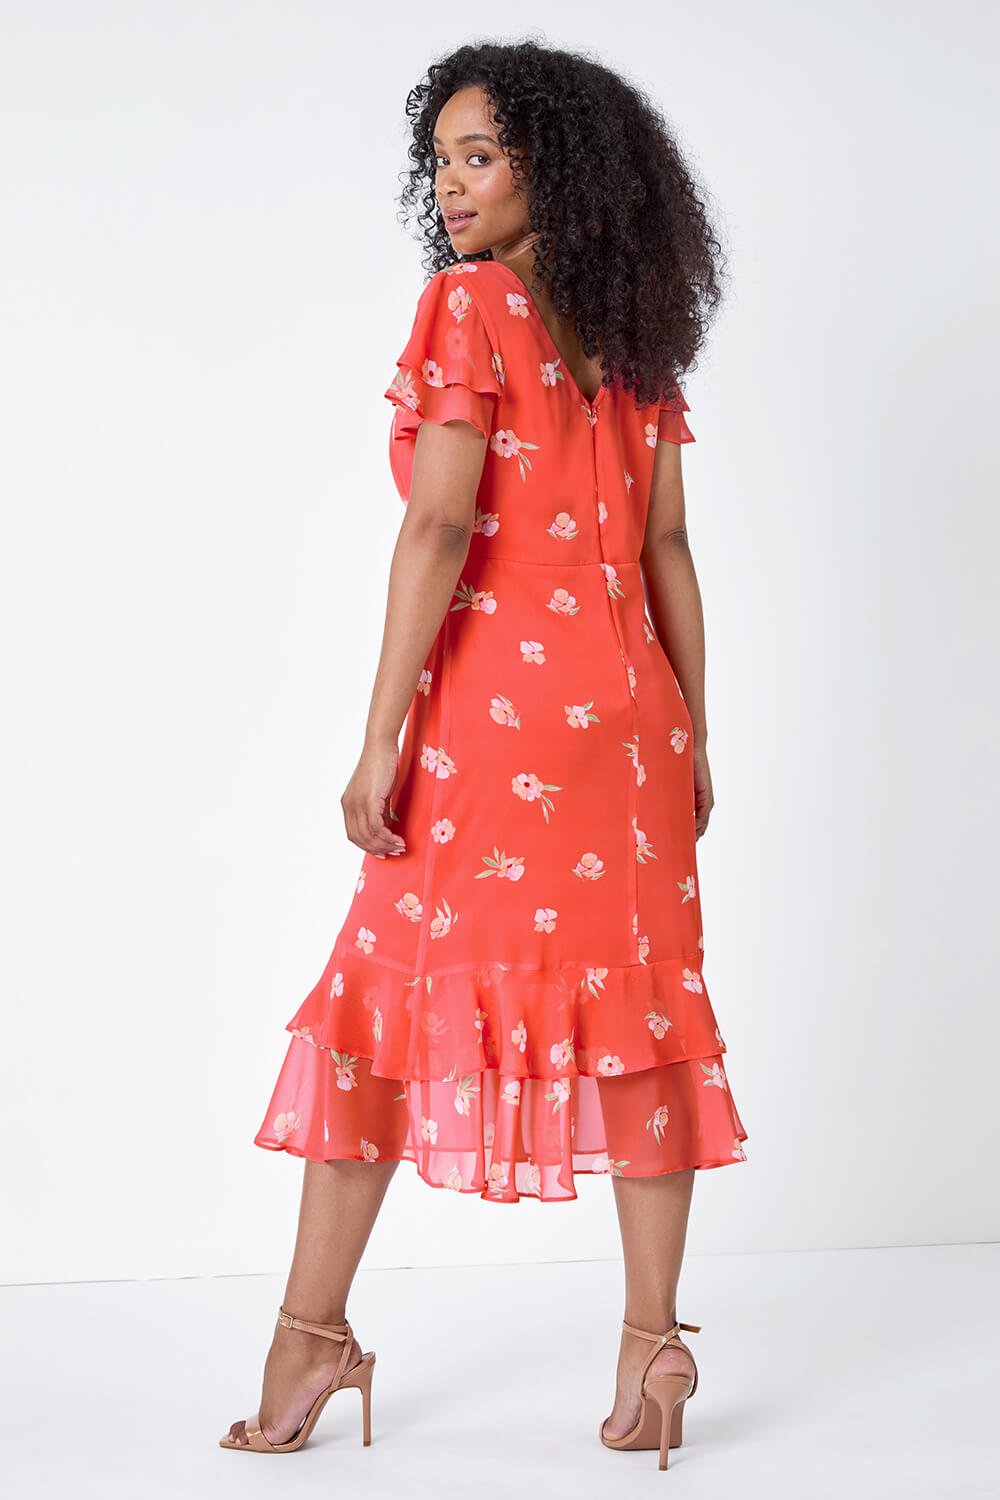 CORAL Petite Floral Frill Tiered Midi Dress, Image 3 of 5